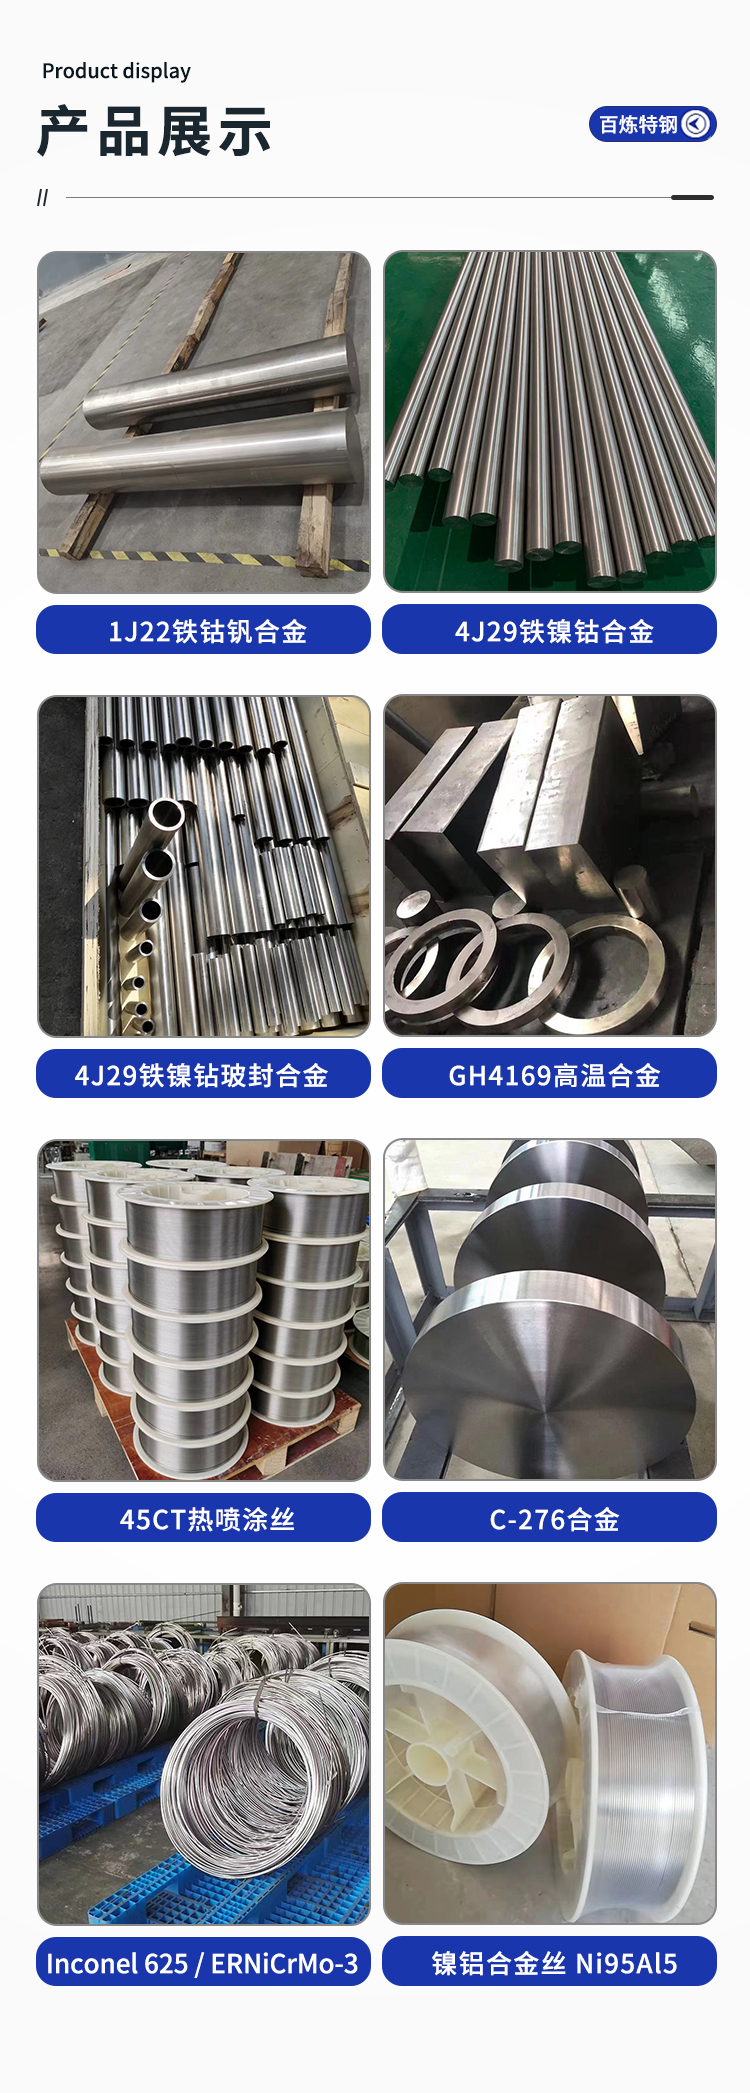 4J36 invar alloy steel is widely used in radio, precision instruments, instruments, and other industries